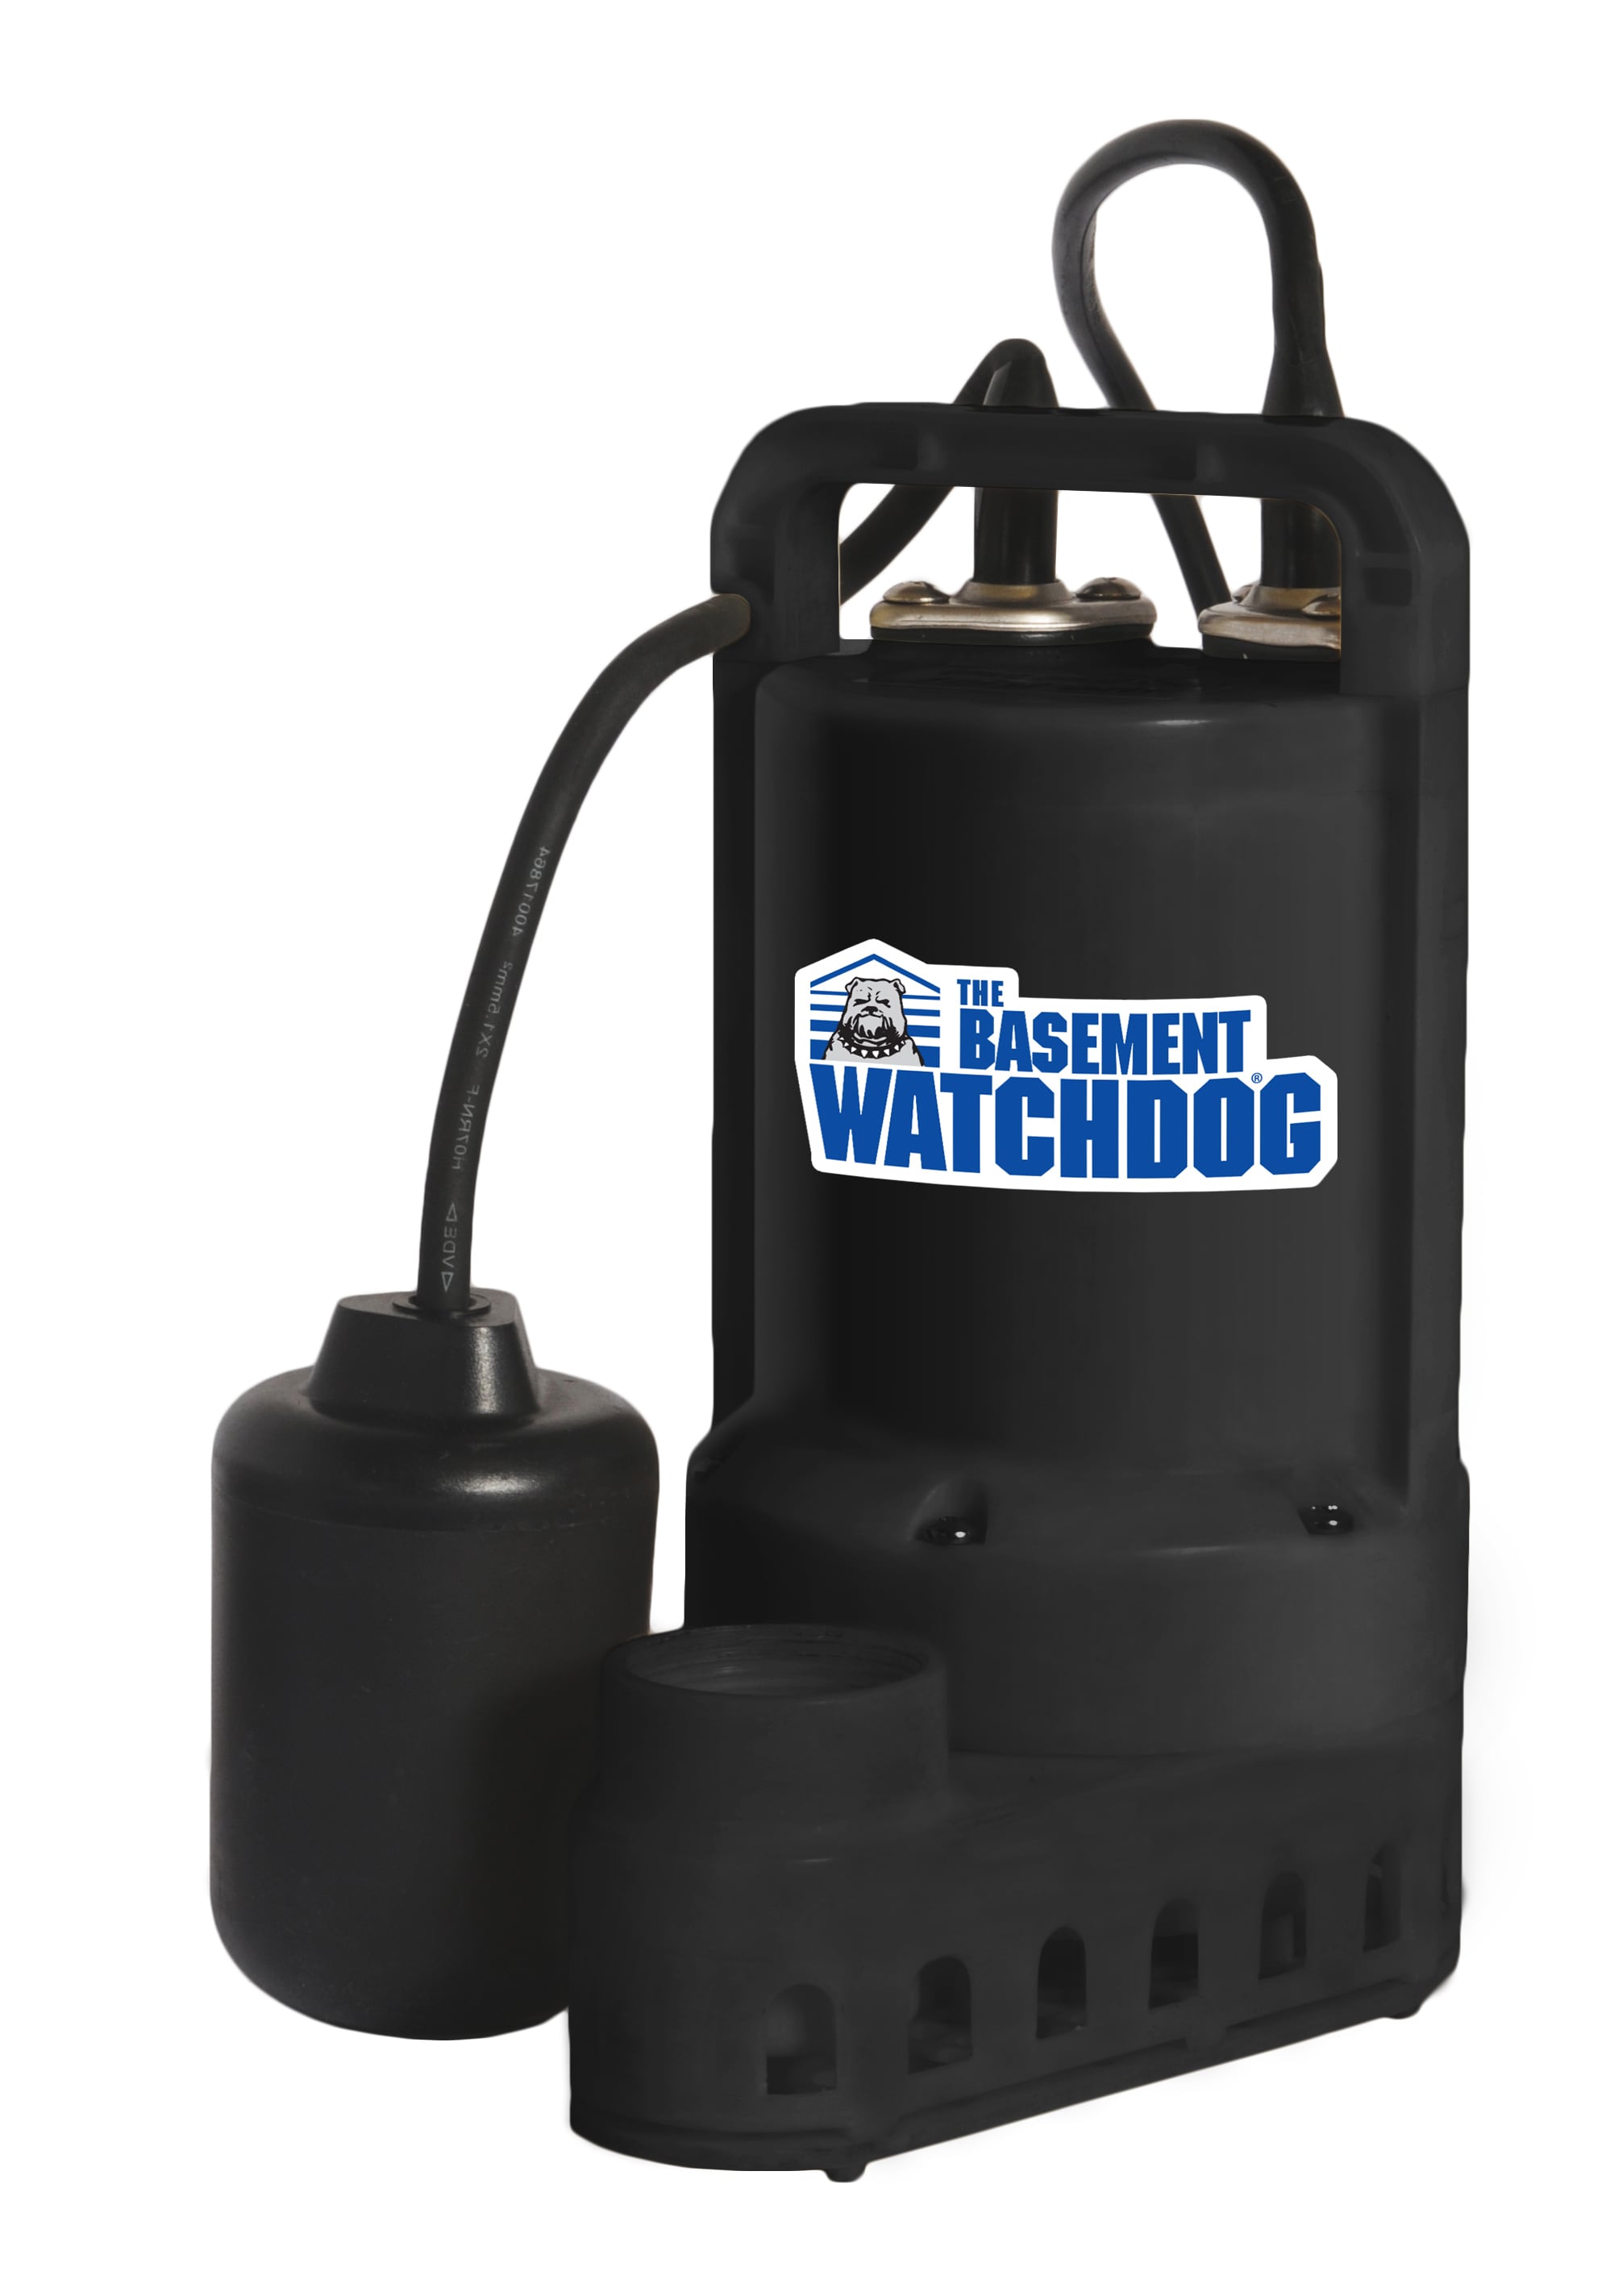 Submersible sump pump Tethered Water Pumps & Tanks at Lowes.com